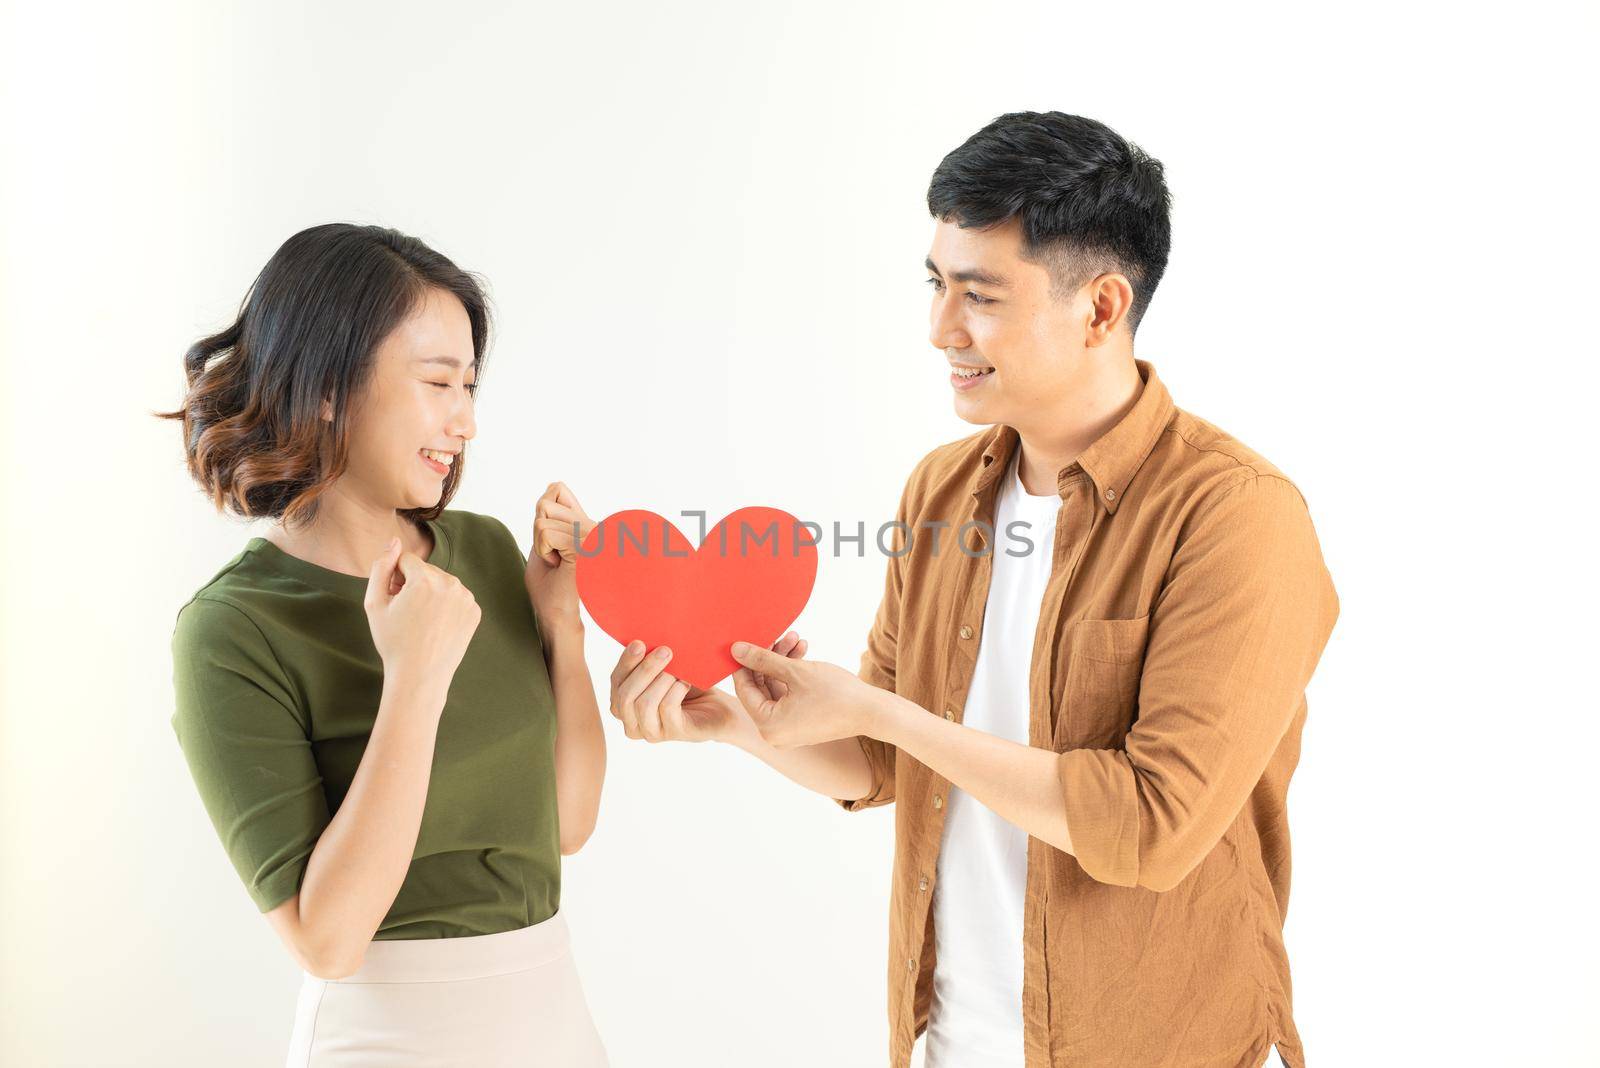 Smiling loving couple holding heart shape over white background. by makidotvn